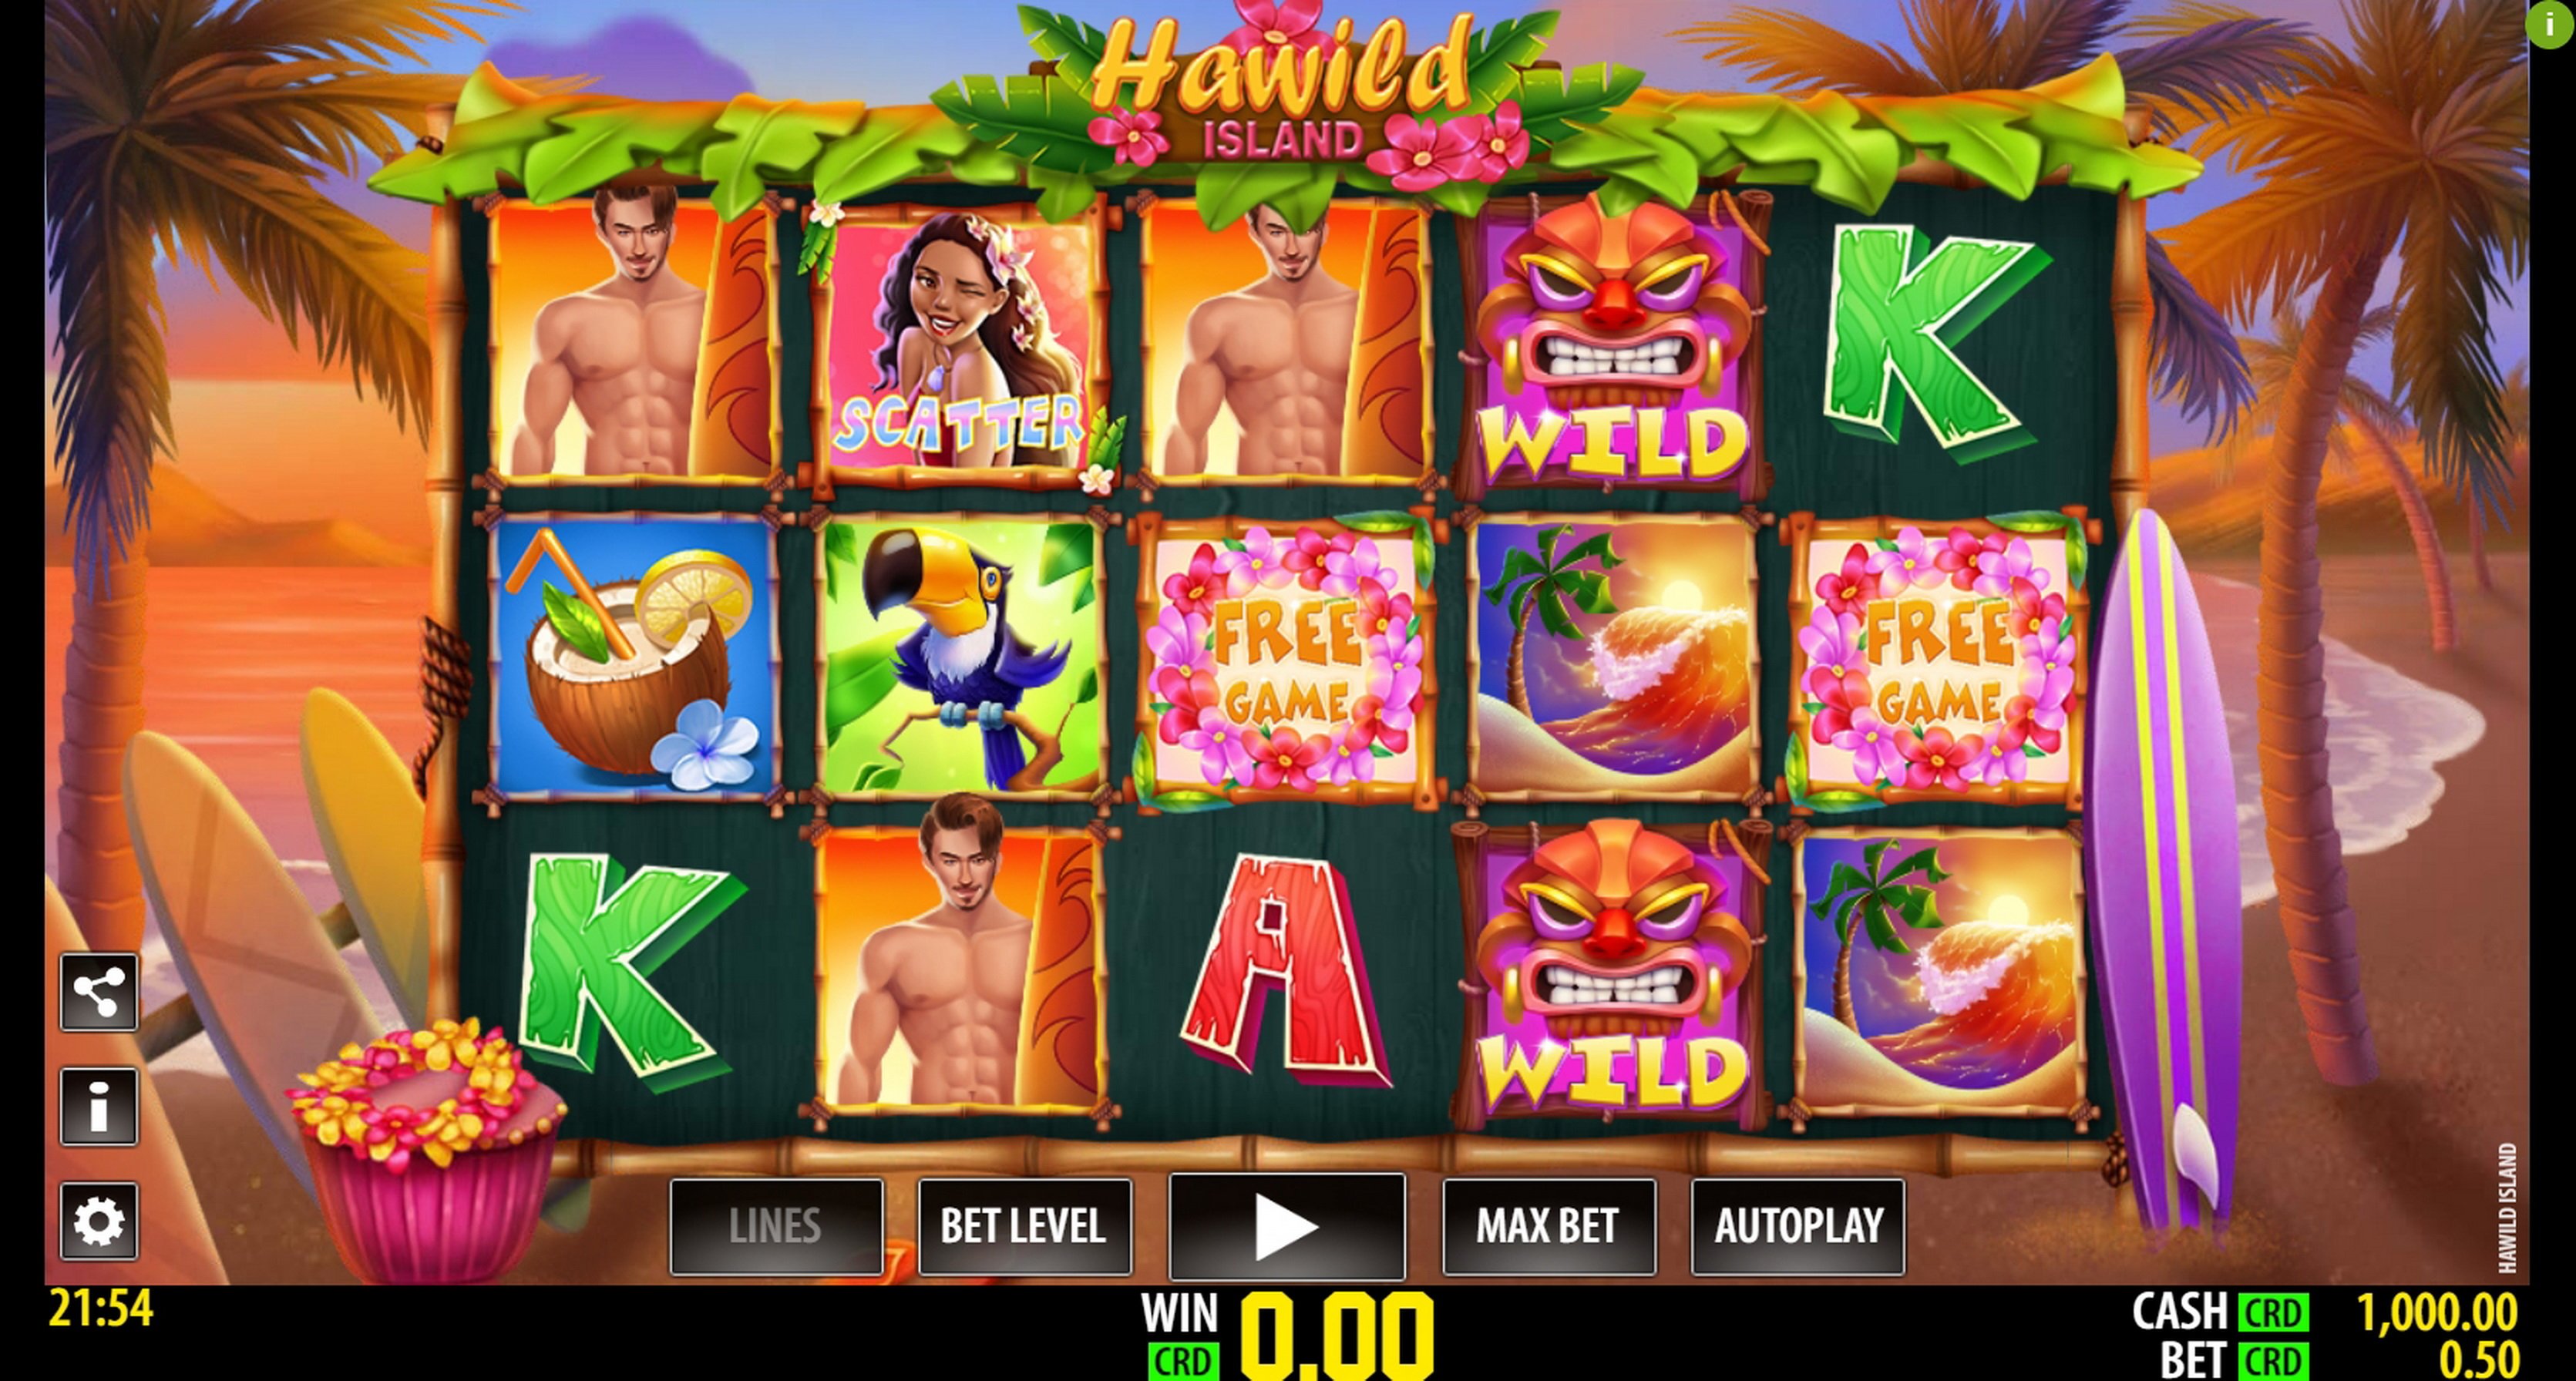 Reels in Hawild Island Slot Game by World Match